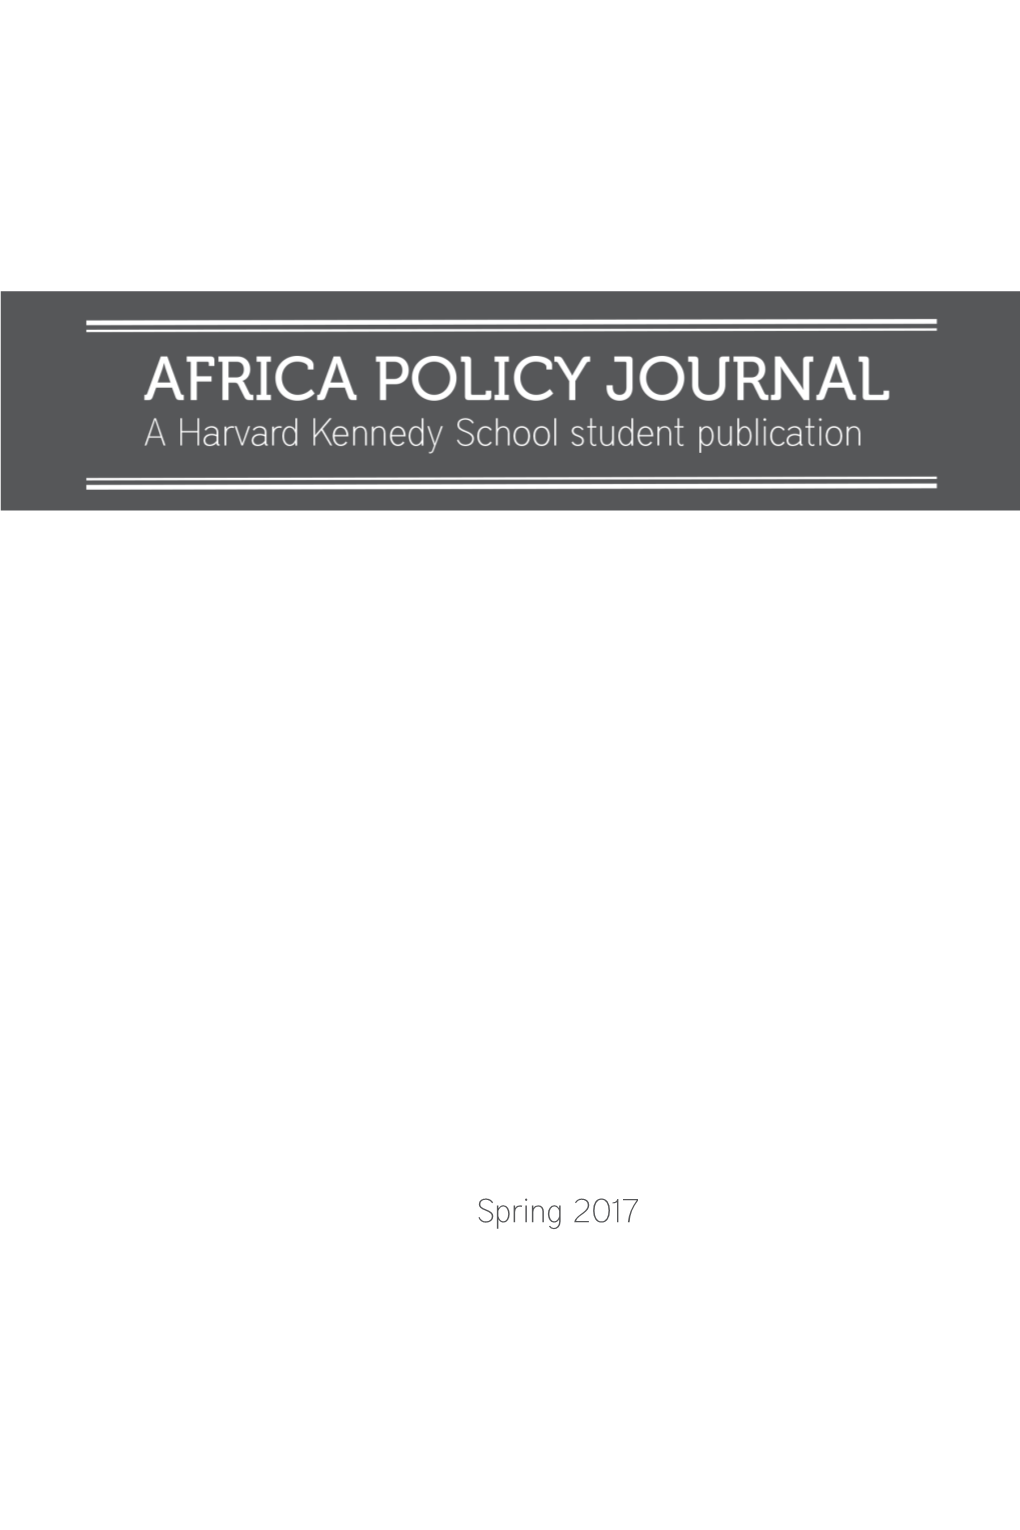 Spring 2017 the AFRICA POLICY JOURNAL